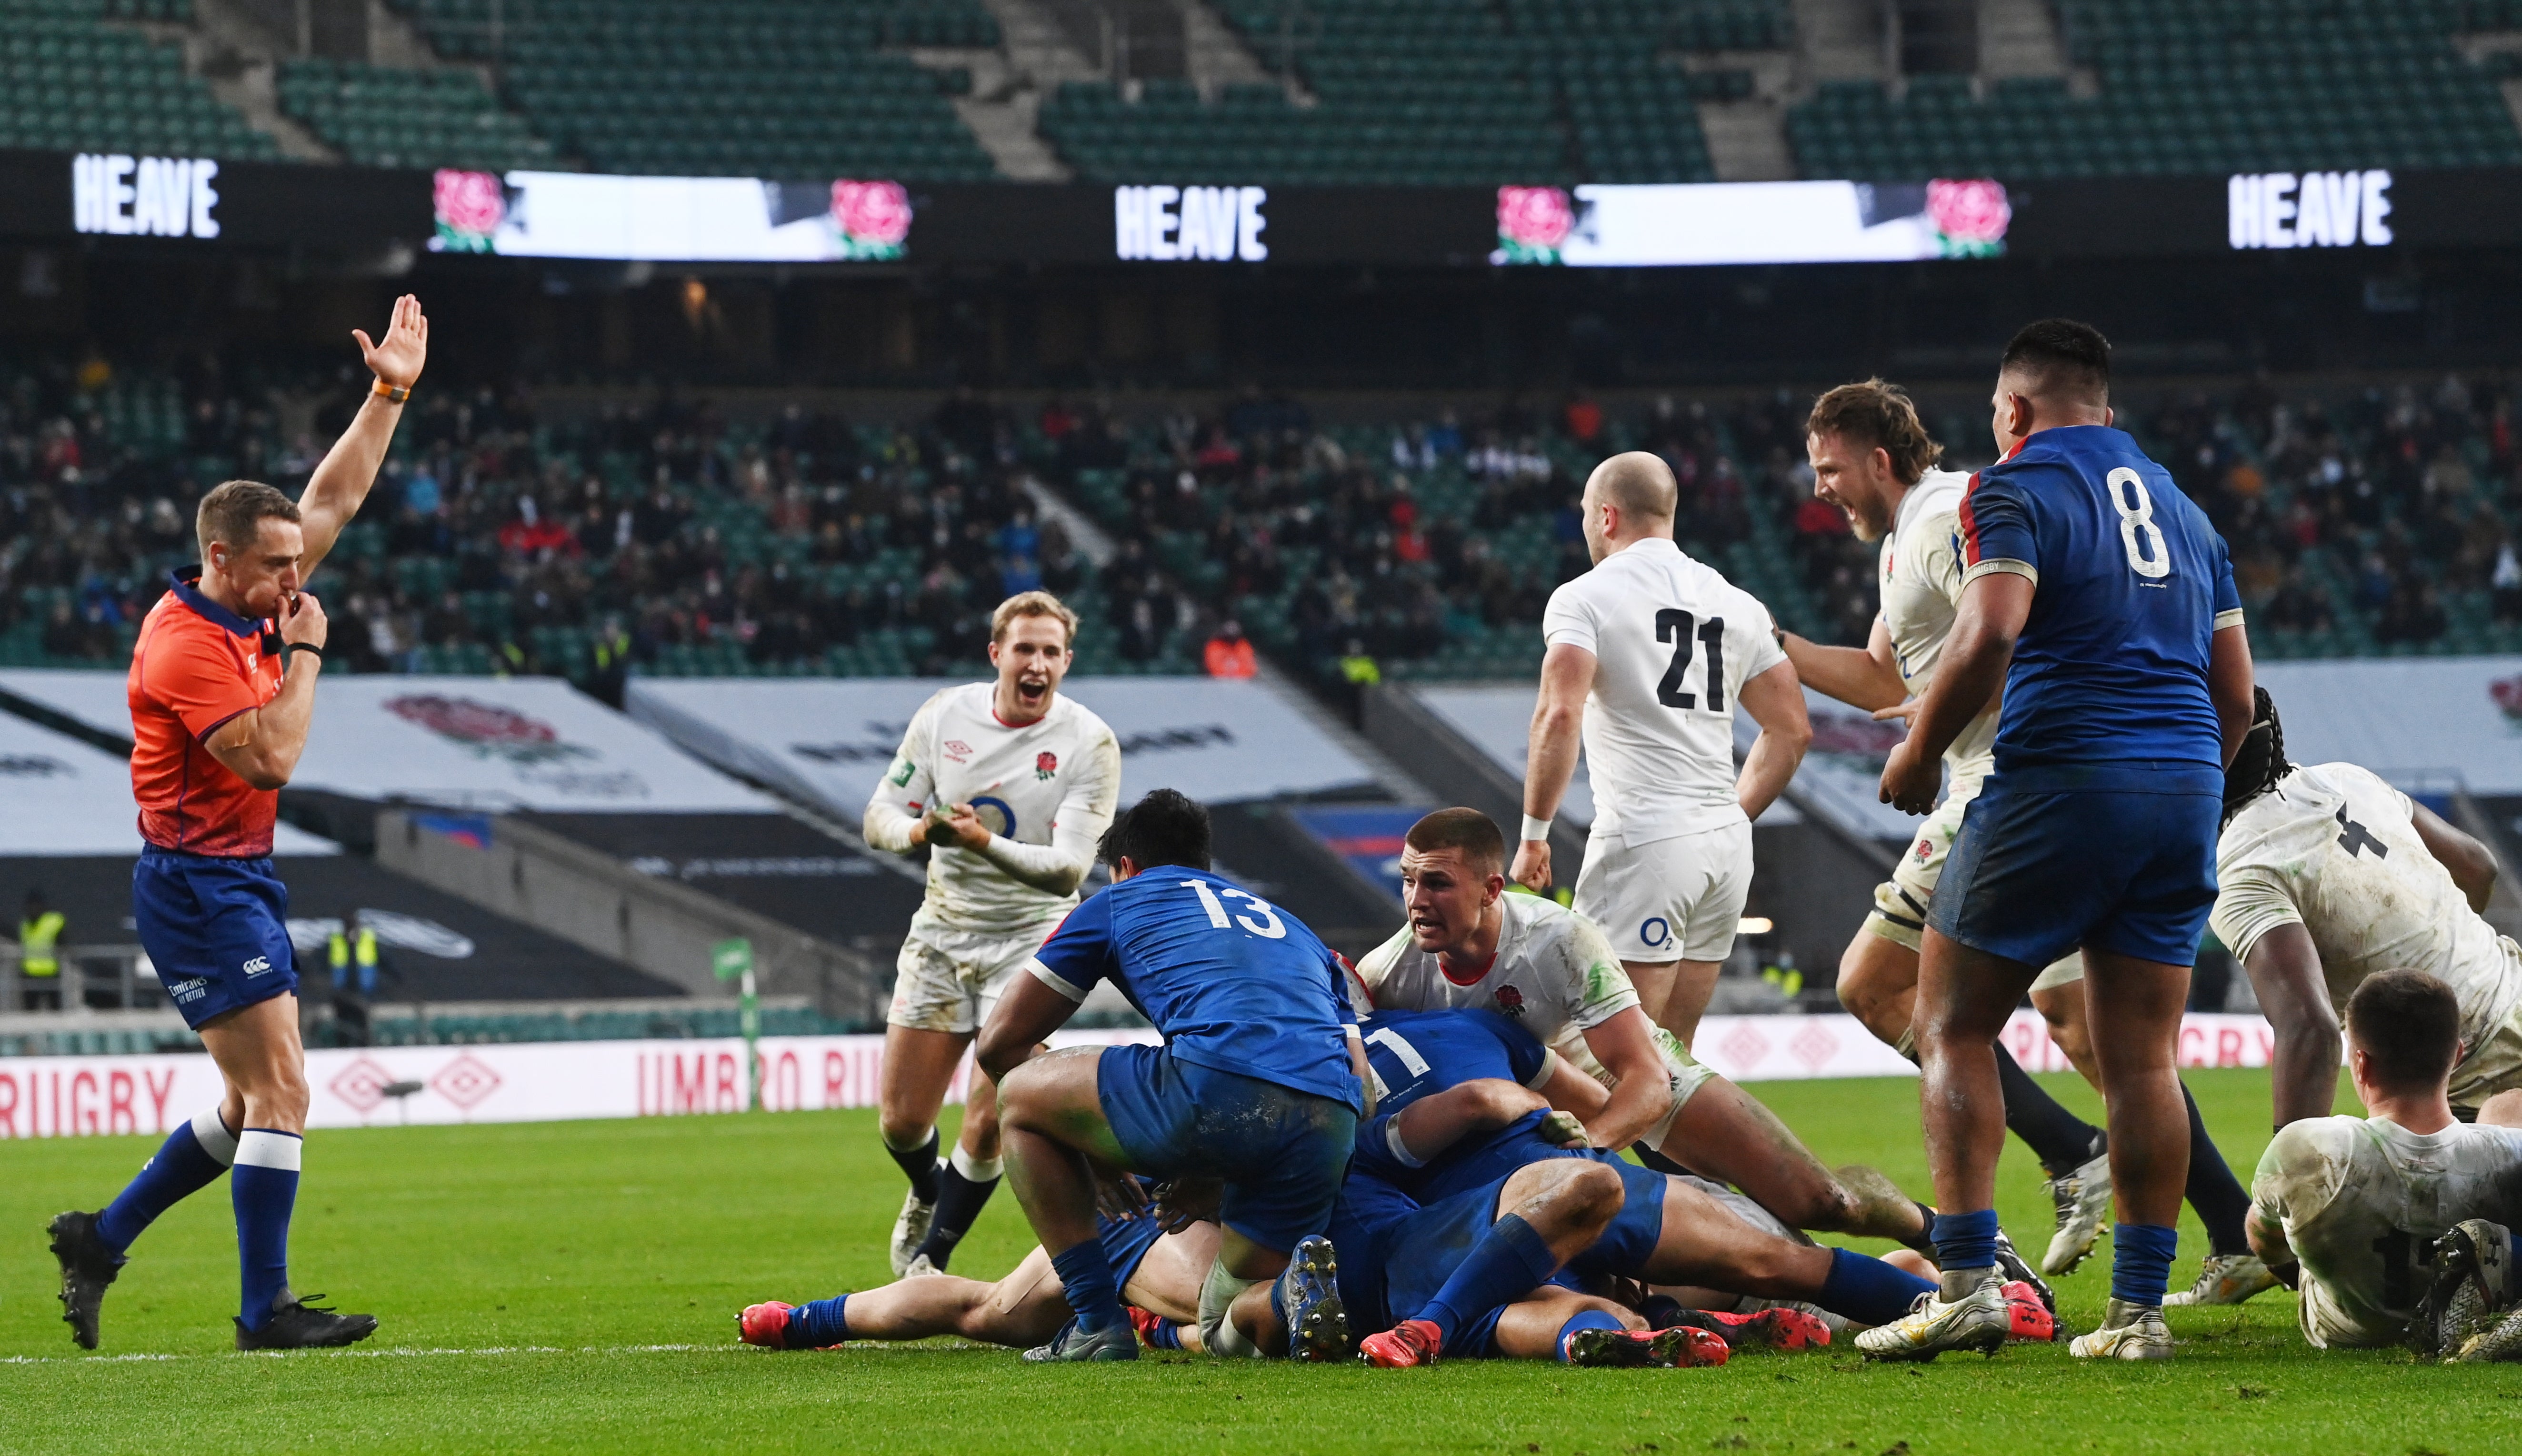 Luke Cowan-Dickie scores England’s 80th-minute try to draw level with France